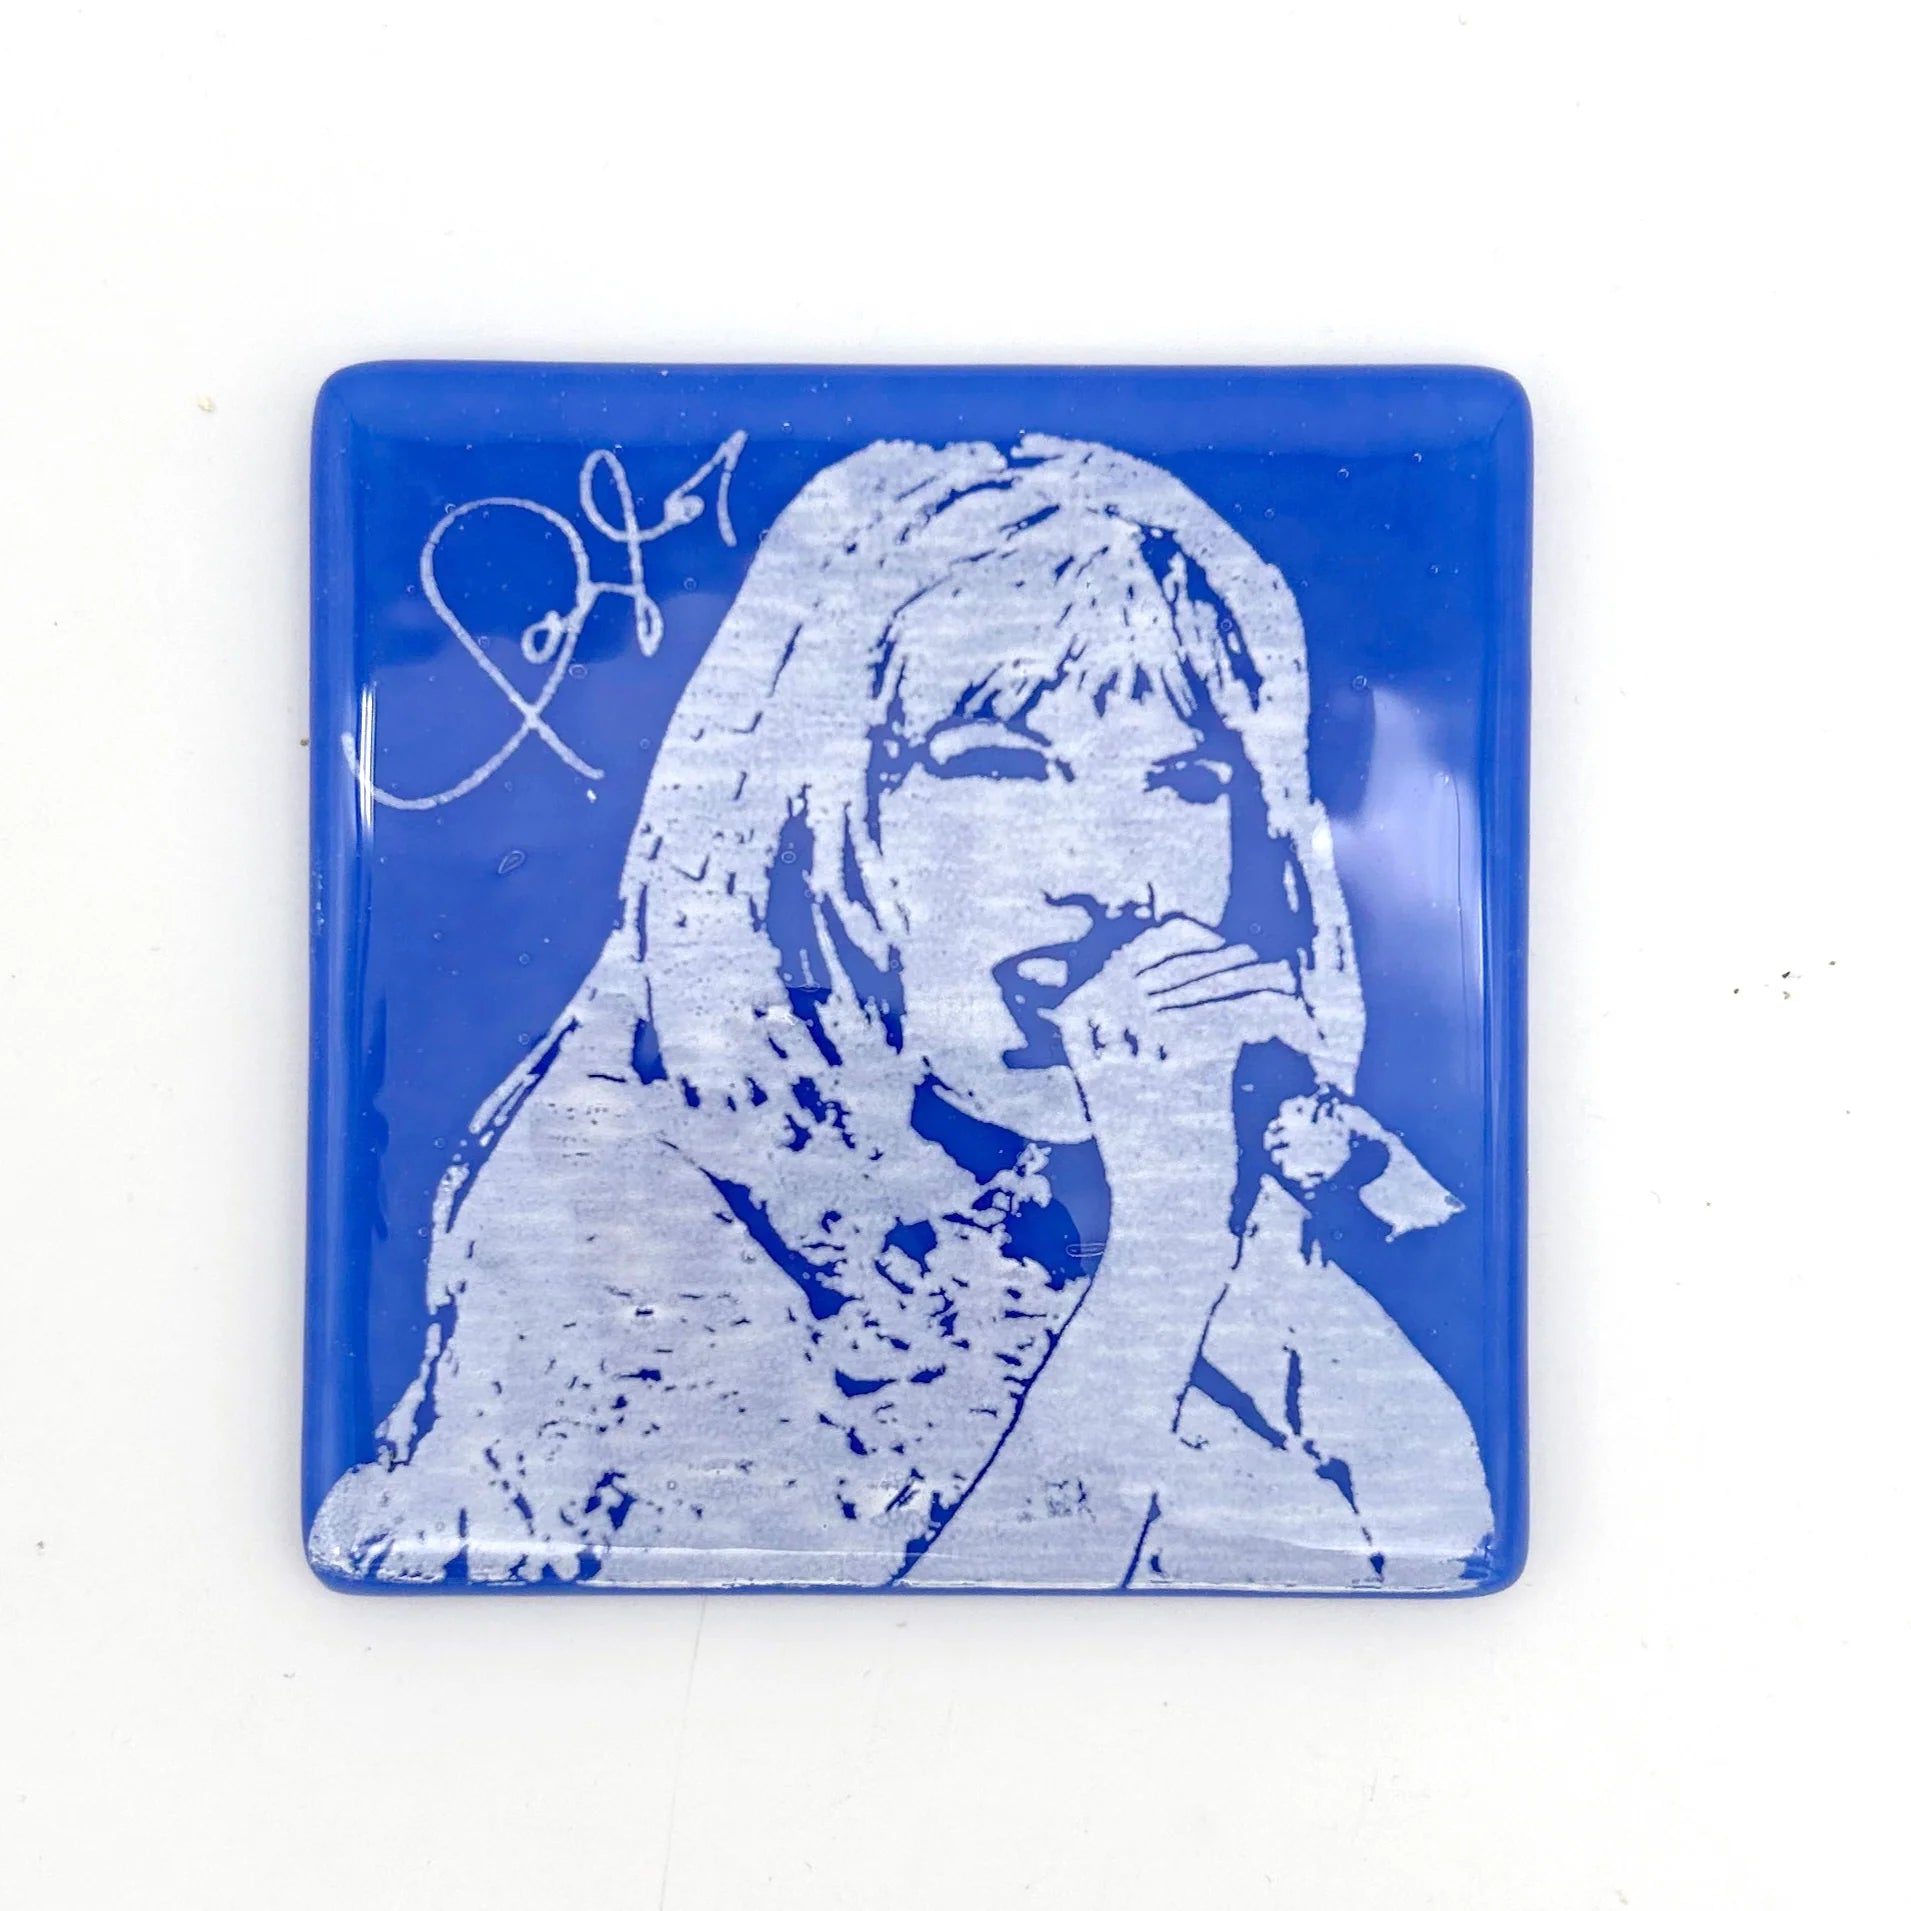 TAYLOR SWIFT FUSED GLASS COASTER